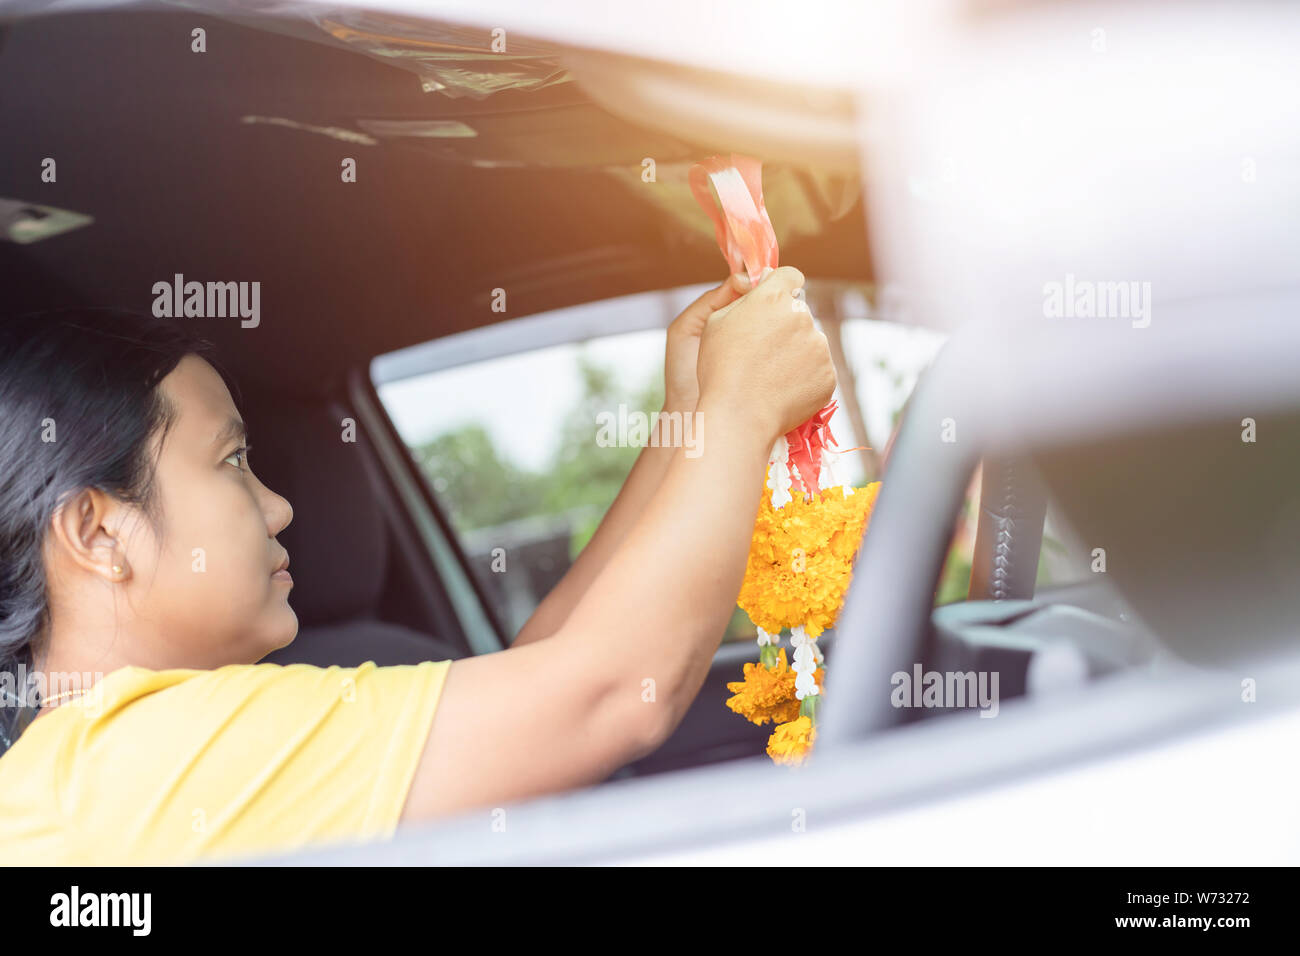 Thai woman with yellow flower garland in hand and praying in the new car for lucky, safety in Thai style Stock Photo